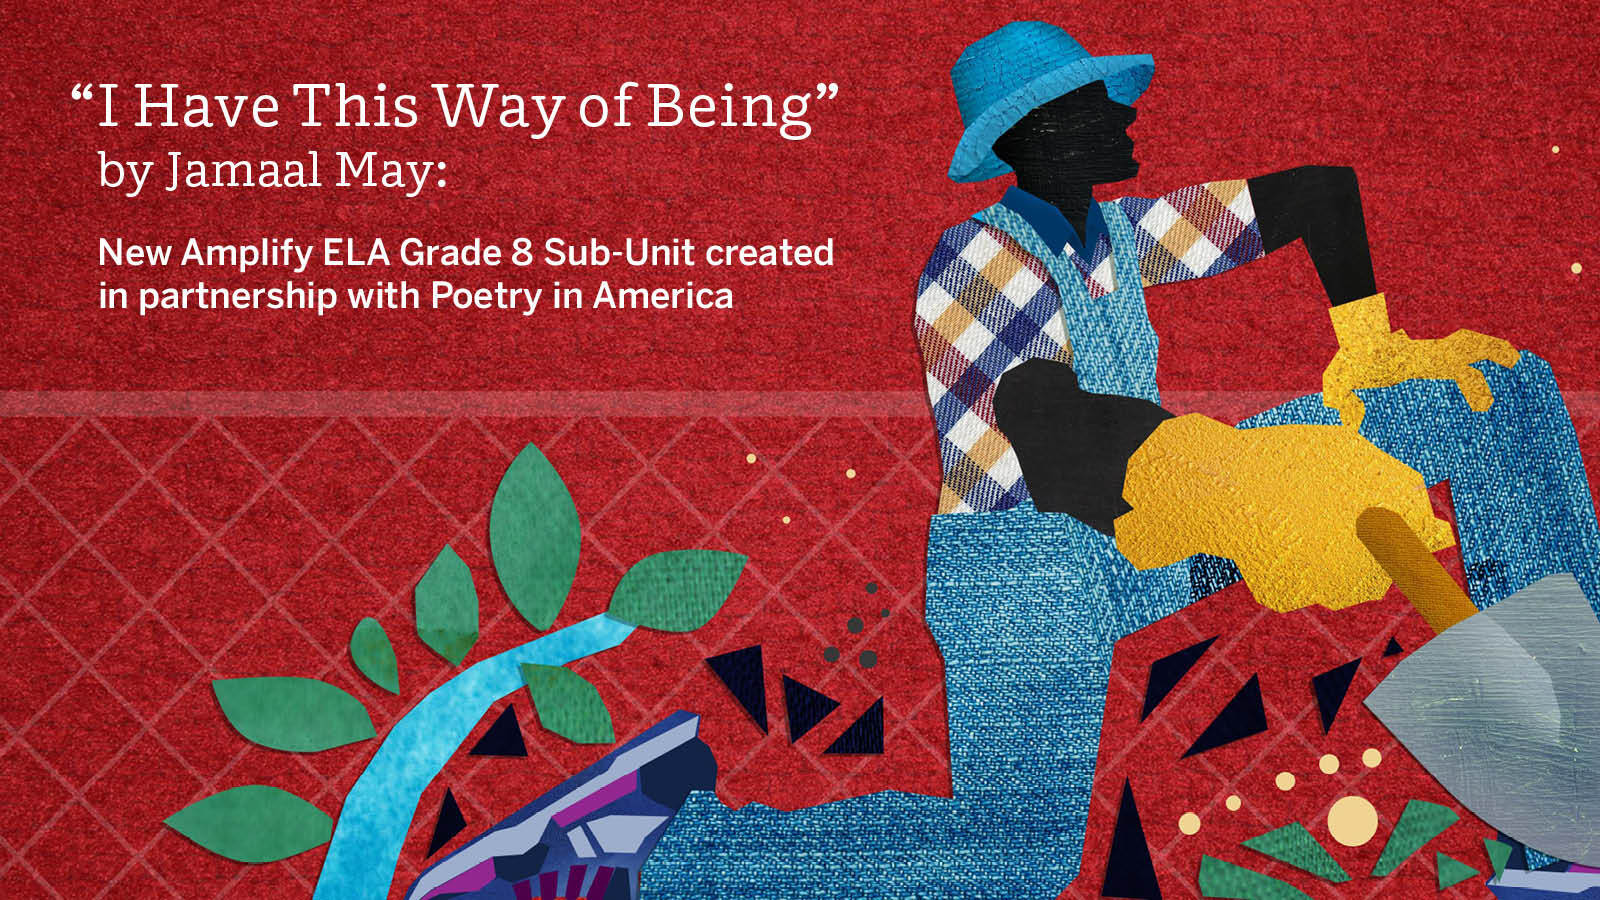 A red collage style poster for our Amplify ELA Grade 8 sub-unit on "I have this way of being" by Jamaal May, pictured: a man on one knee, wearing blue overalls and a hat with a shovel and plants around him.